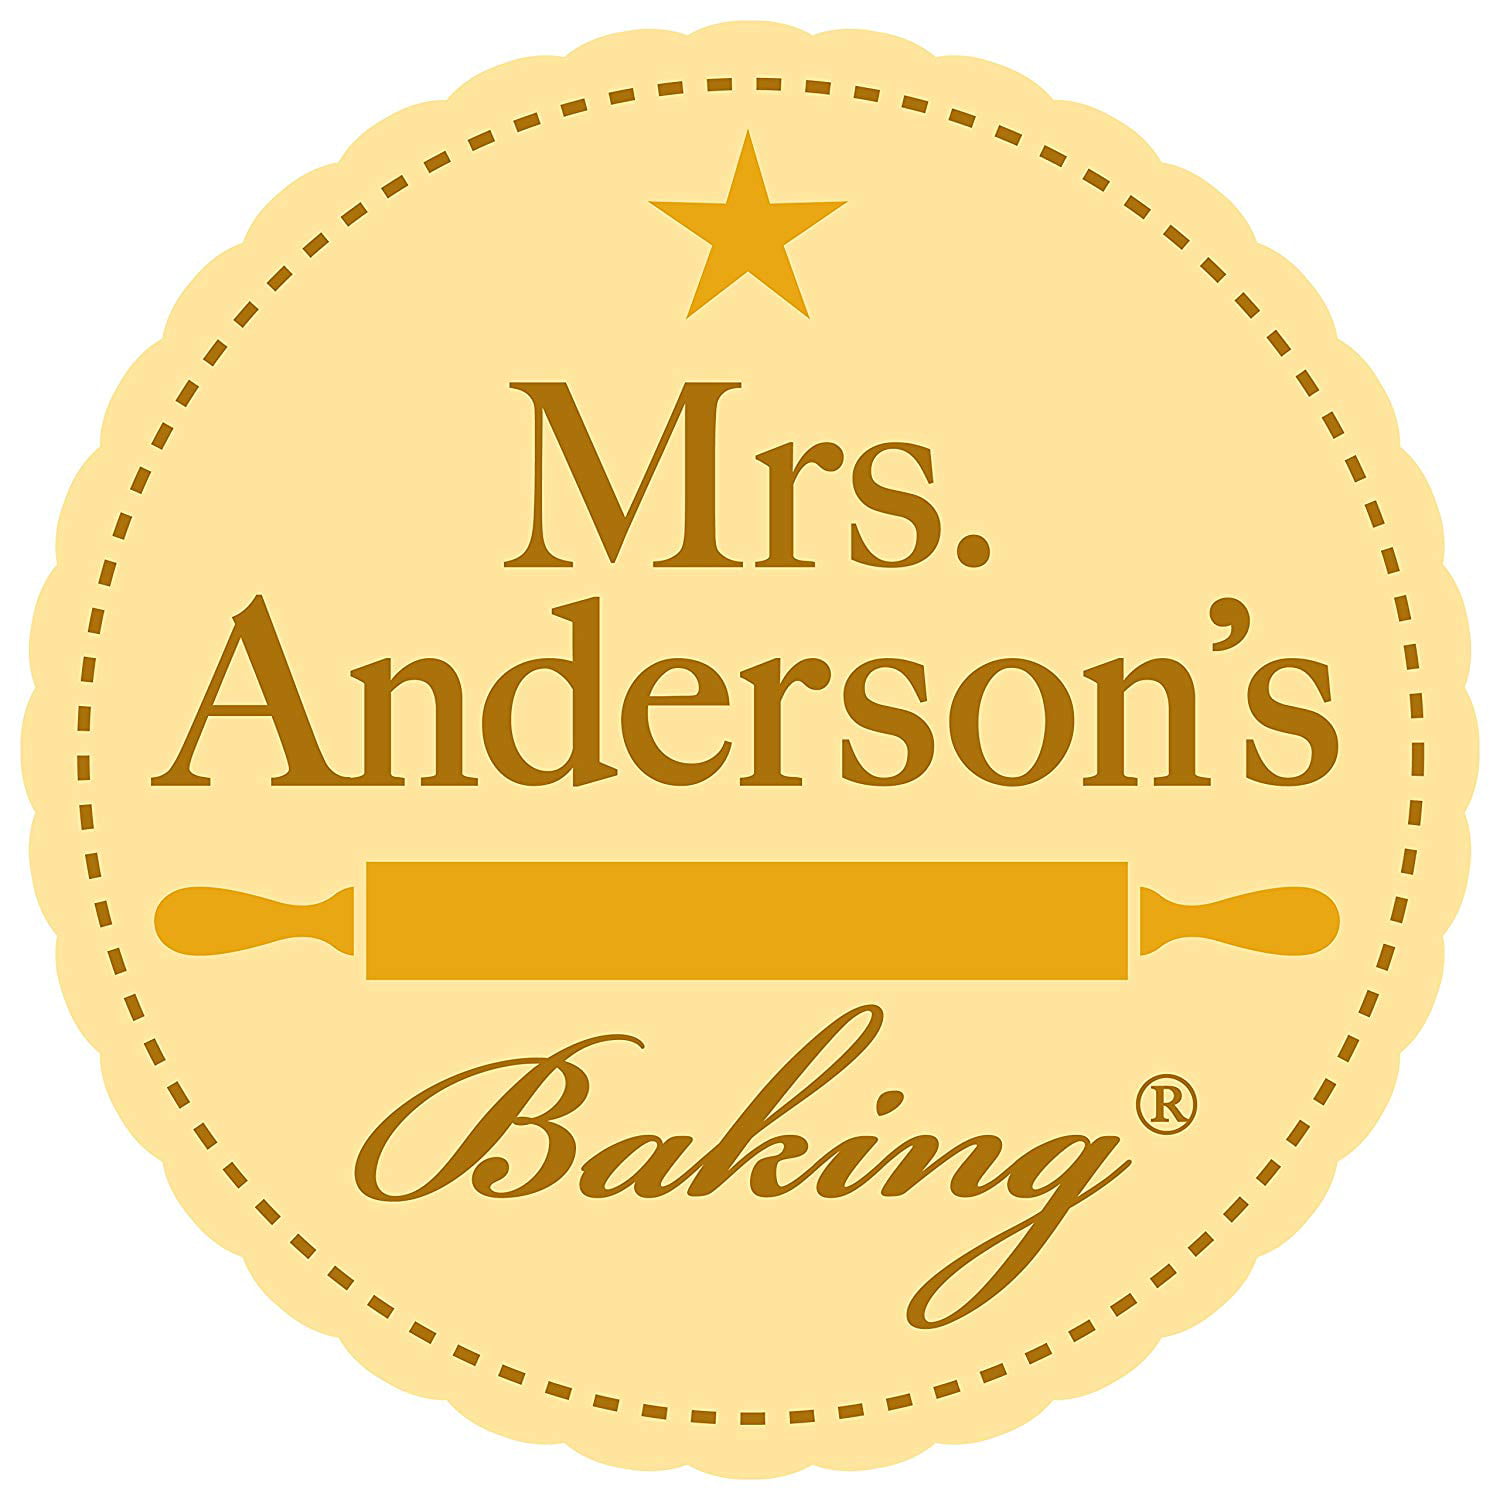 Anderson’s Baking 43193 Professional Baking and Cooling Rack Chrome-Plated Steel Wire 6-Inches Round Mrs